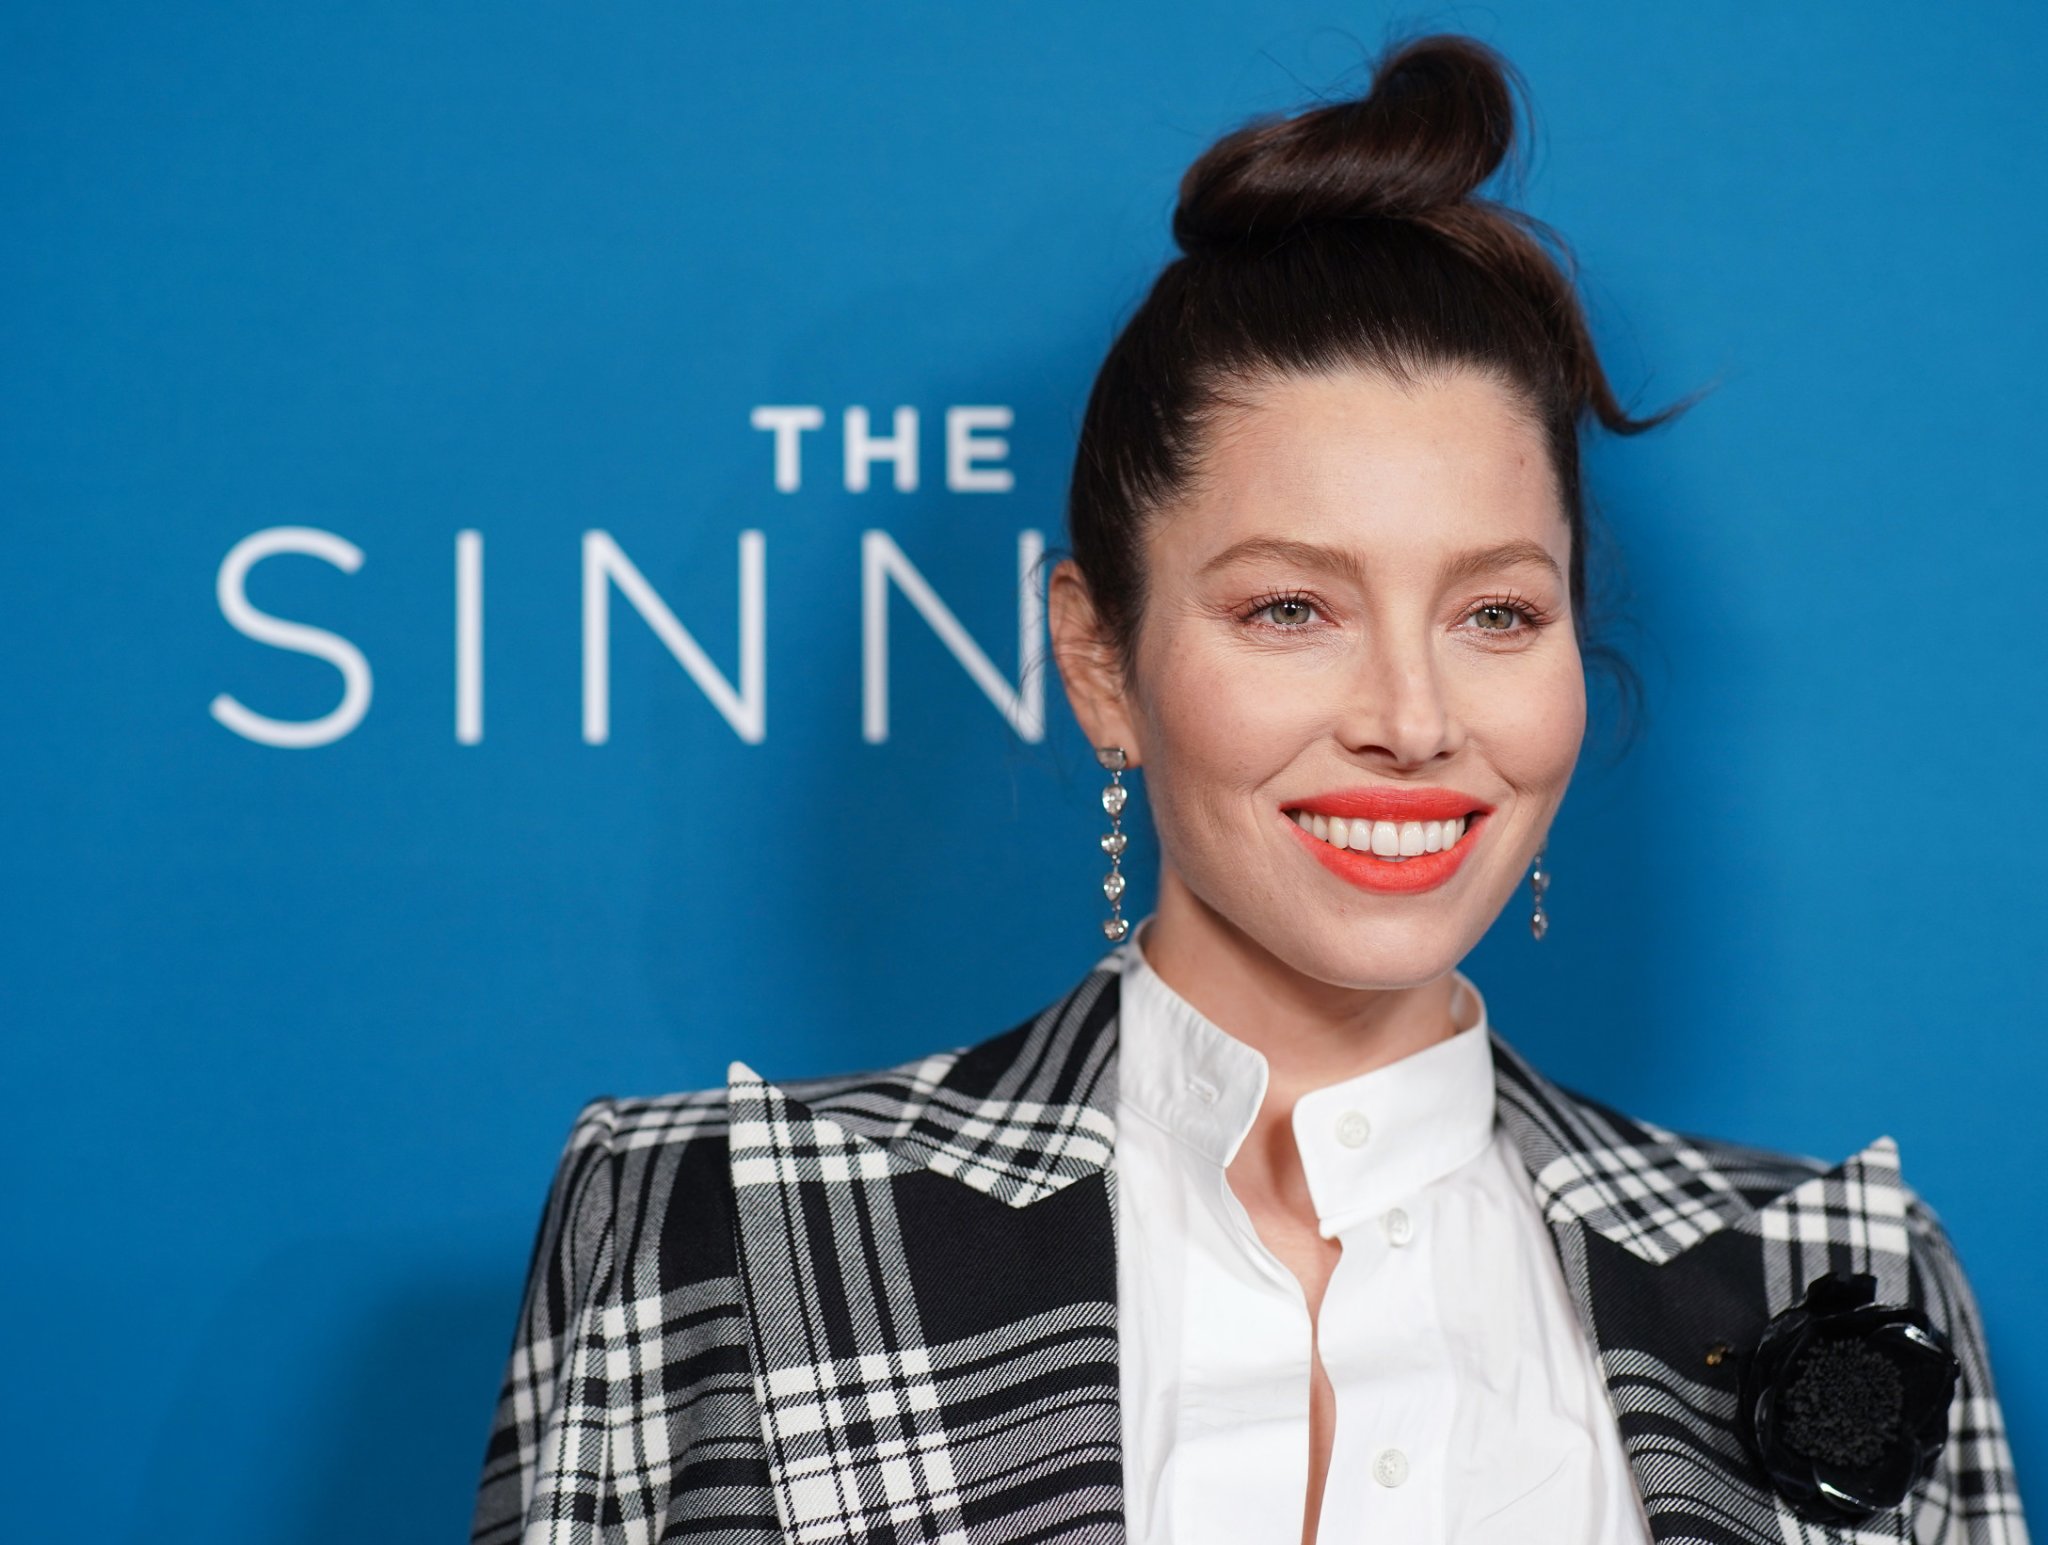 Jessica Biel Had to 'Start From Scratch' & Relearn the Baby Basics With Her Second Son